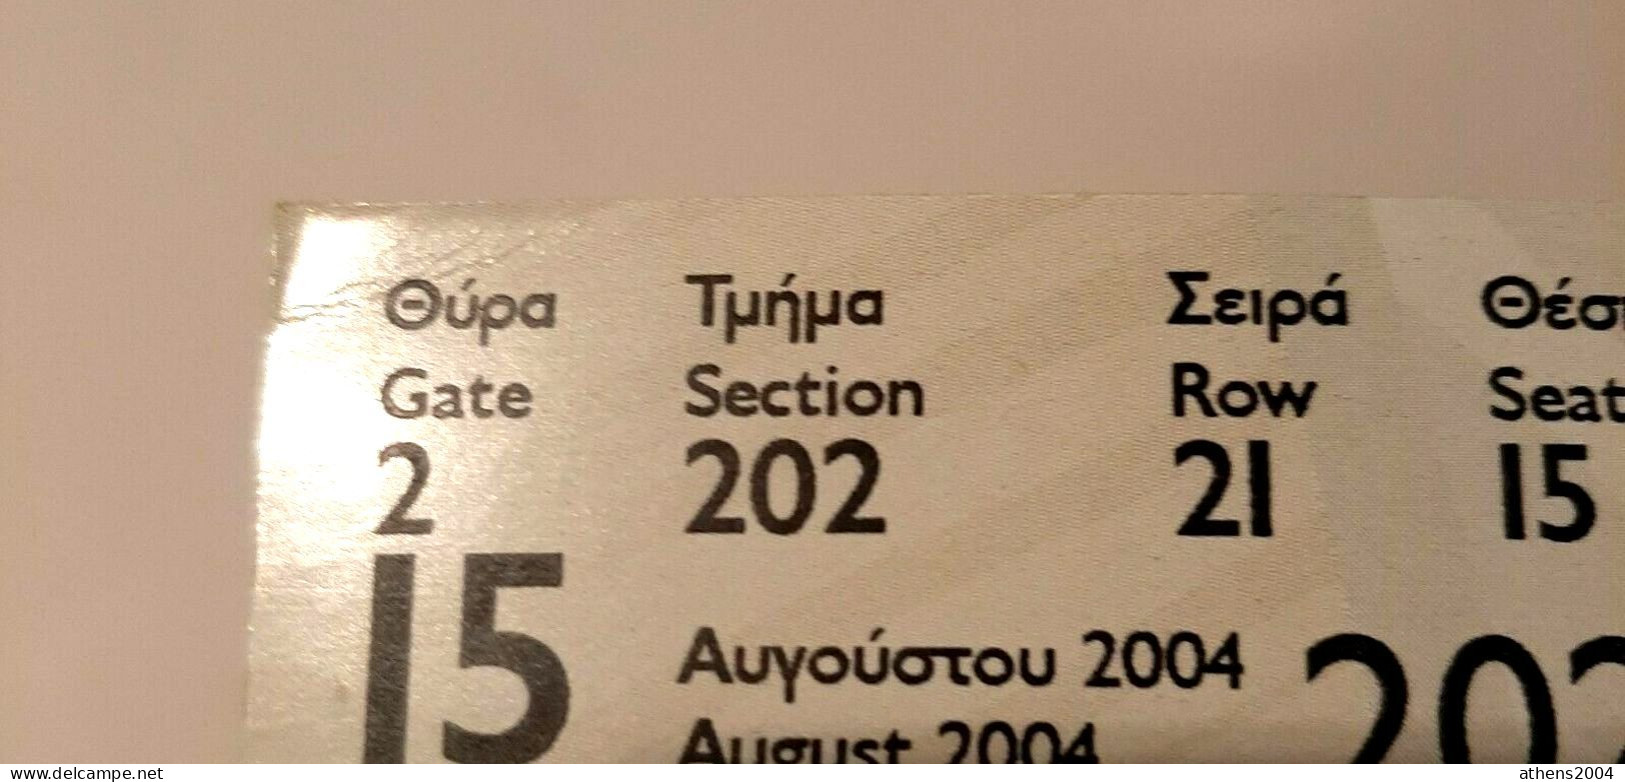 Athens 2004 Olympic Games -  Fencing Unused Ticket, Code: 202 - Apparel, Souvenirs & Other